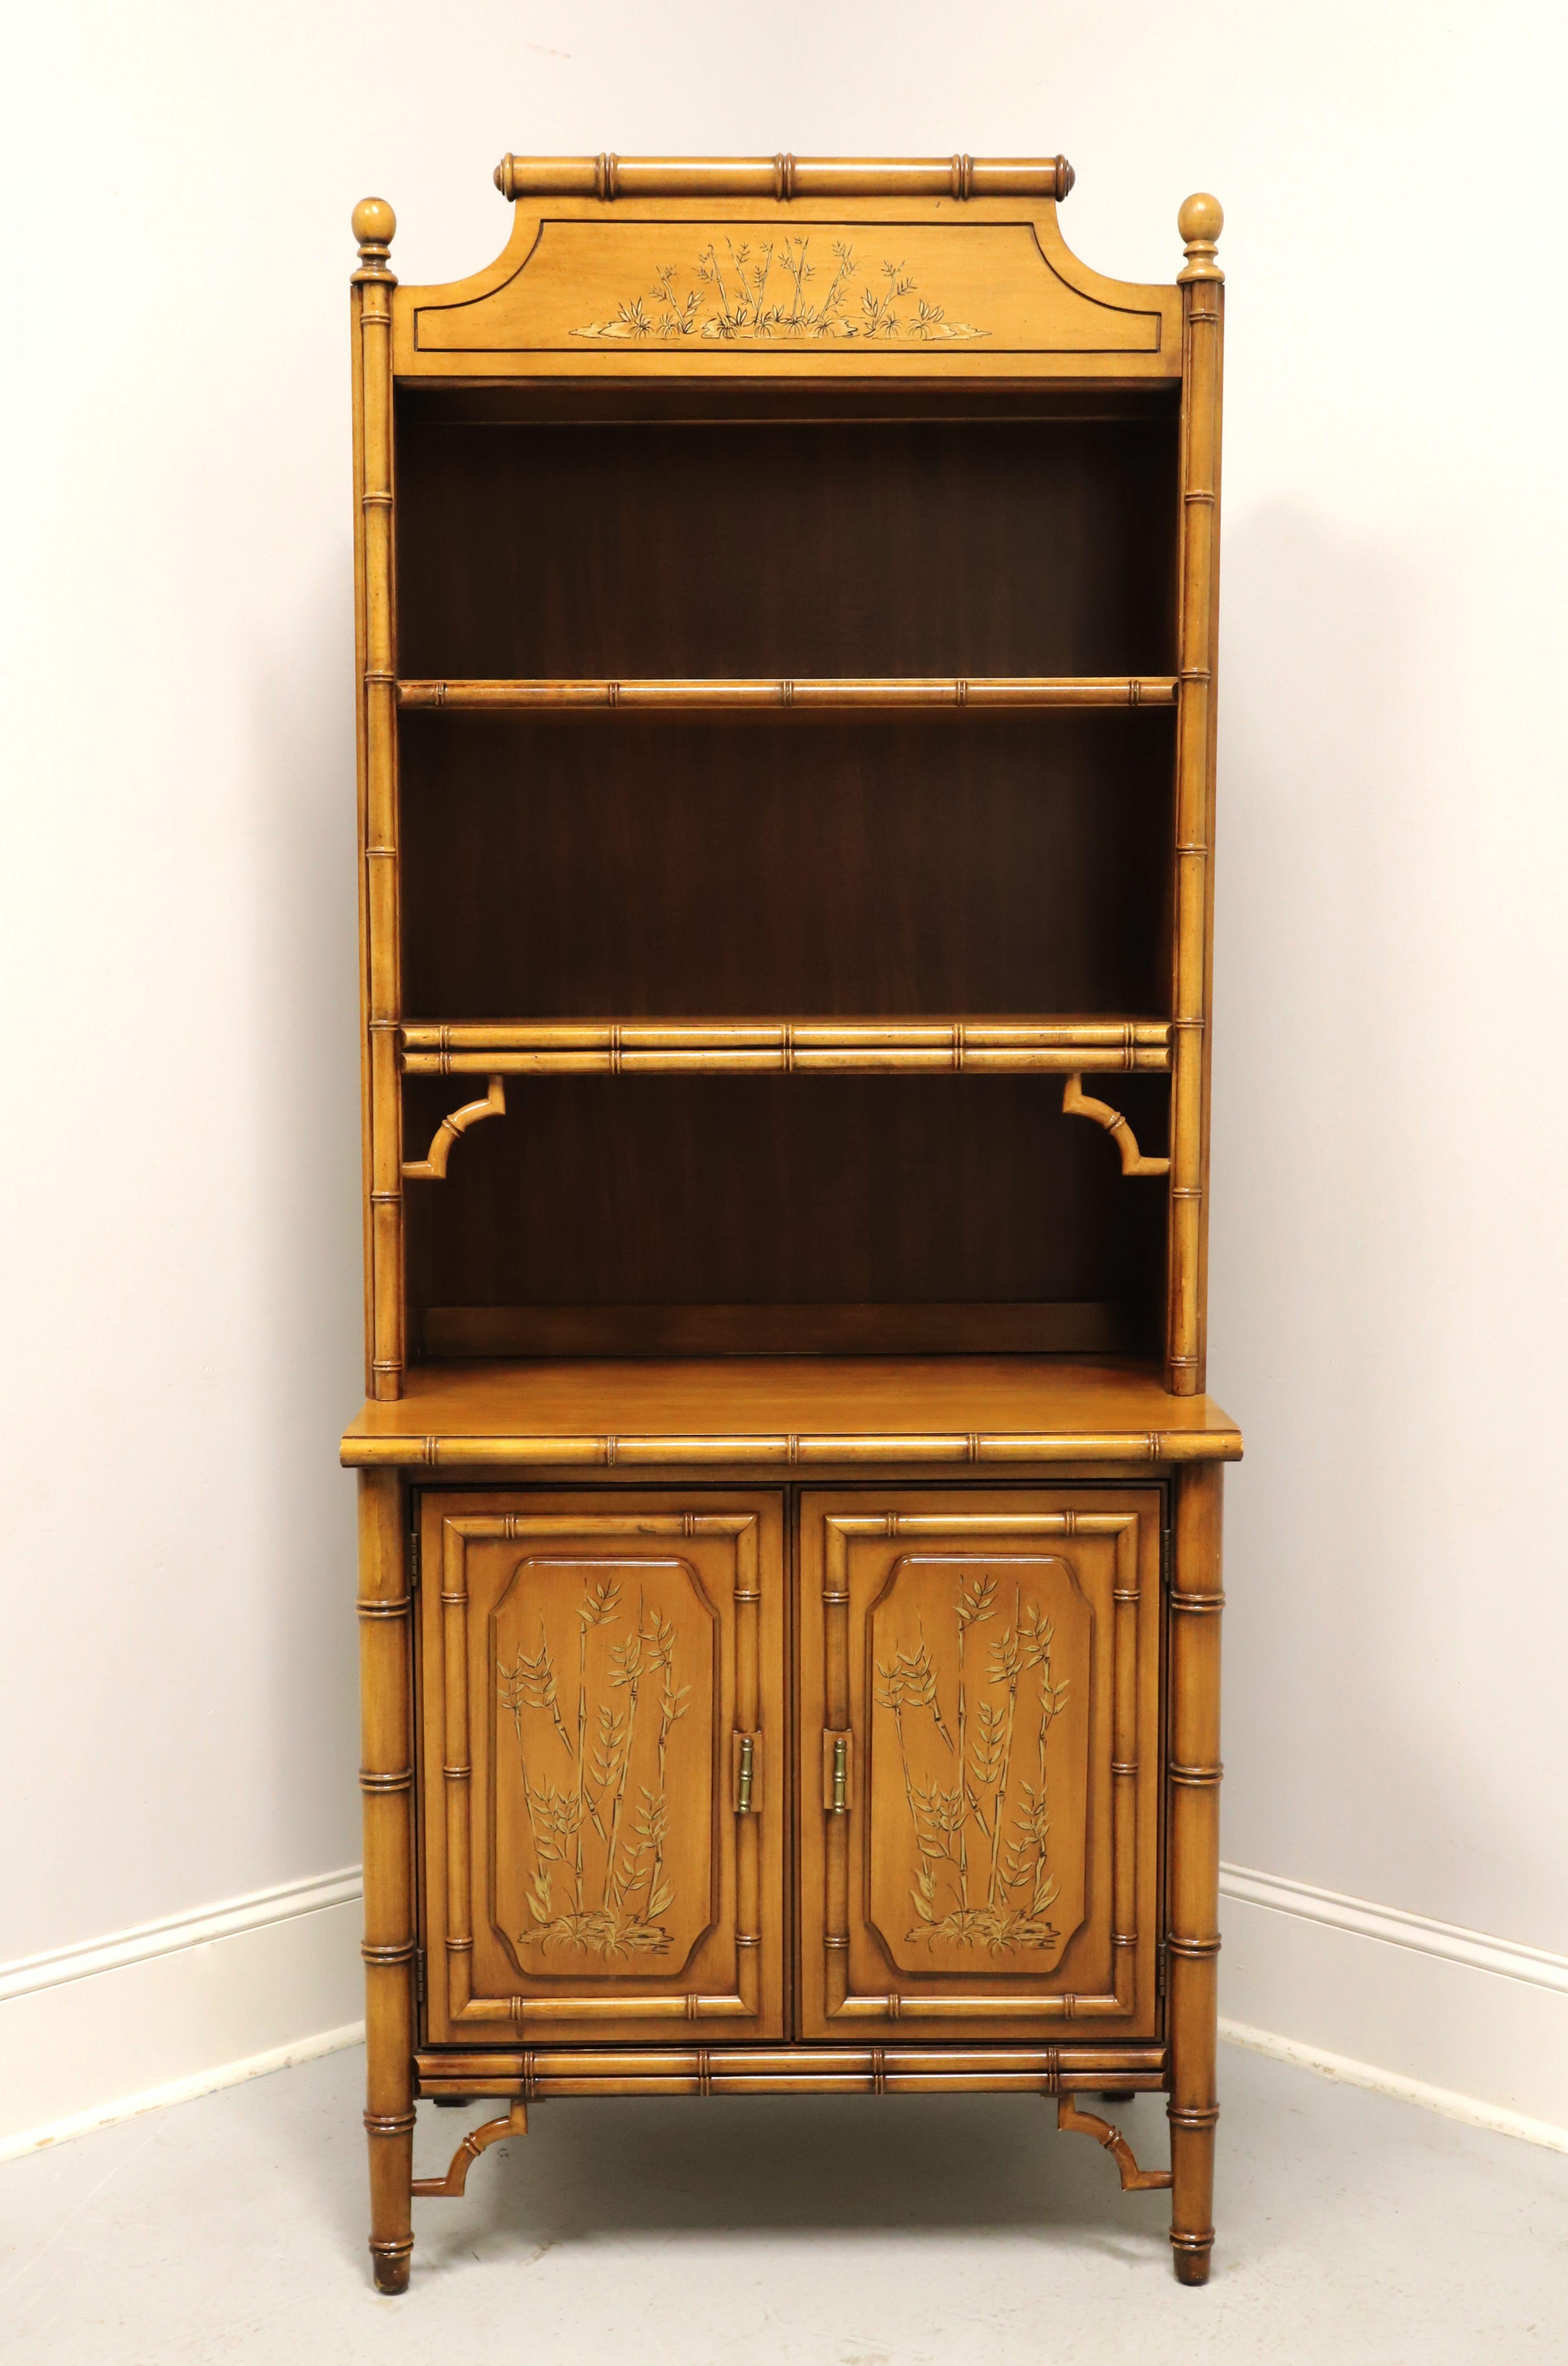 An Asian chinoiserie style bookcase hutch with cabinet chest by Dixie Furniture, from their Aloha Collection. Faux bamboo wood with hand painted chinoiserie scene on the doors & top, decorative scroll like top with finials, brass hardware, and